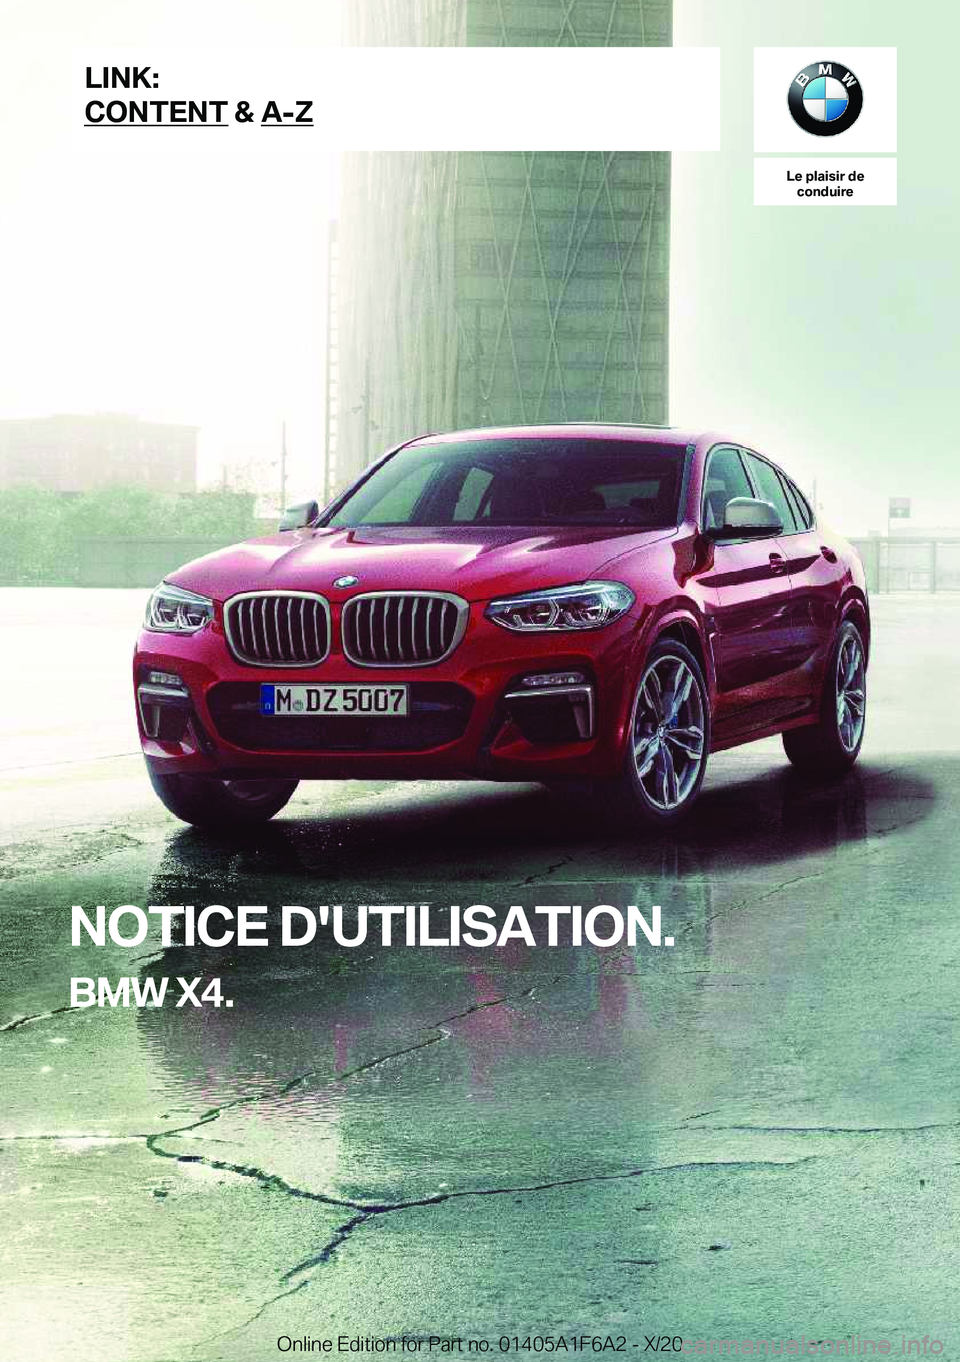 BMW X4 2021  Notices Demploi (in French) �L�e��p�l�a�i�s�i�r��d�e�c�o�n�d�u�i�r�e
�N�O�T�I�C�E��D�'�U�T�I�L�I�S�A�T�I�O�N�.
�B�M�W��X�4�.�L�I�N�K�:
�C�O�N�T�E�N�T��&��A�-�Z�O�n�l�i�n�e��E�d�i�t�i�o�n��f�o�r��P�a�r�t��n�o�.��0�